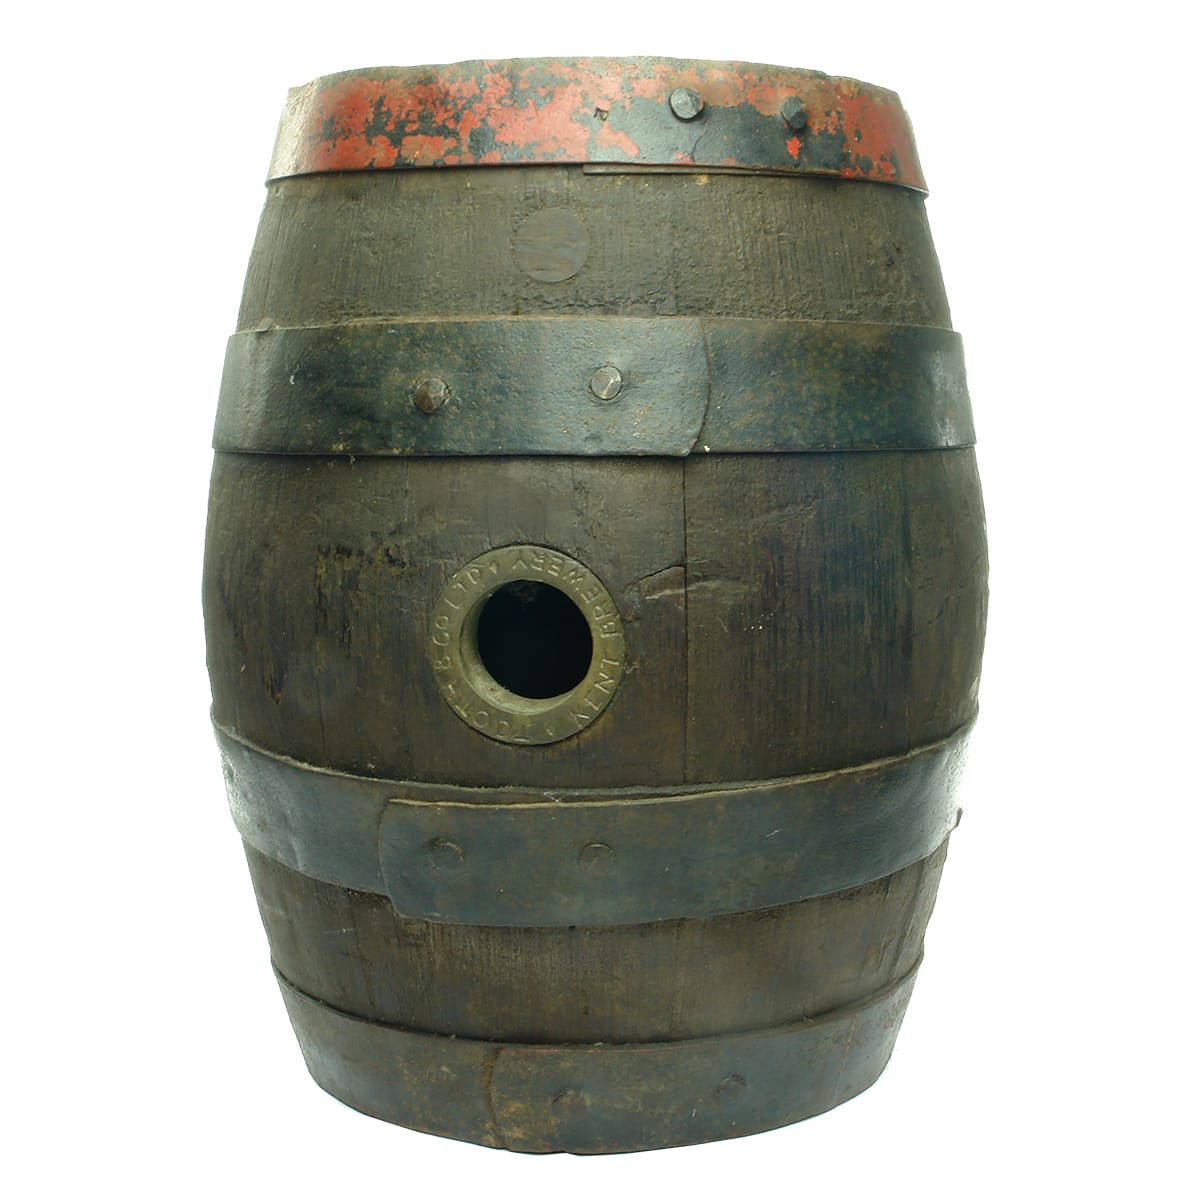 Original Wooden Beer Barrel with Brass bung for Tooth & Co., Kent Brewery, Sydney.